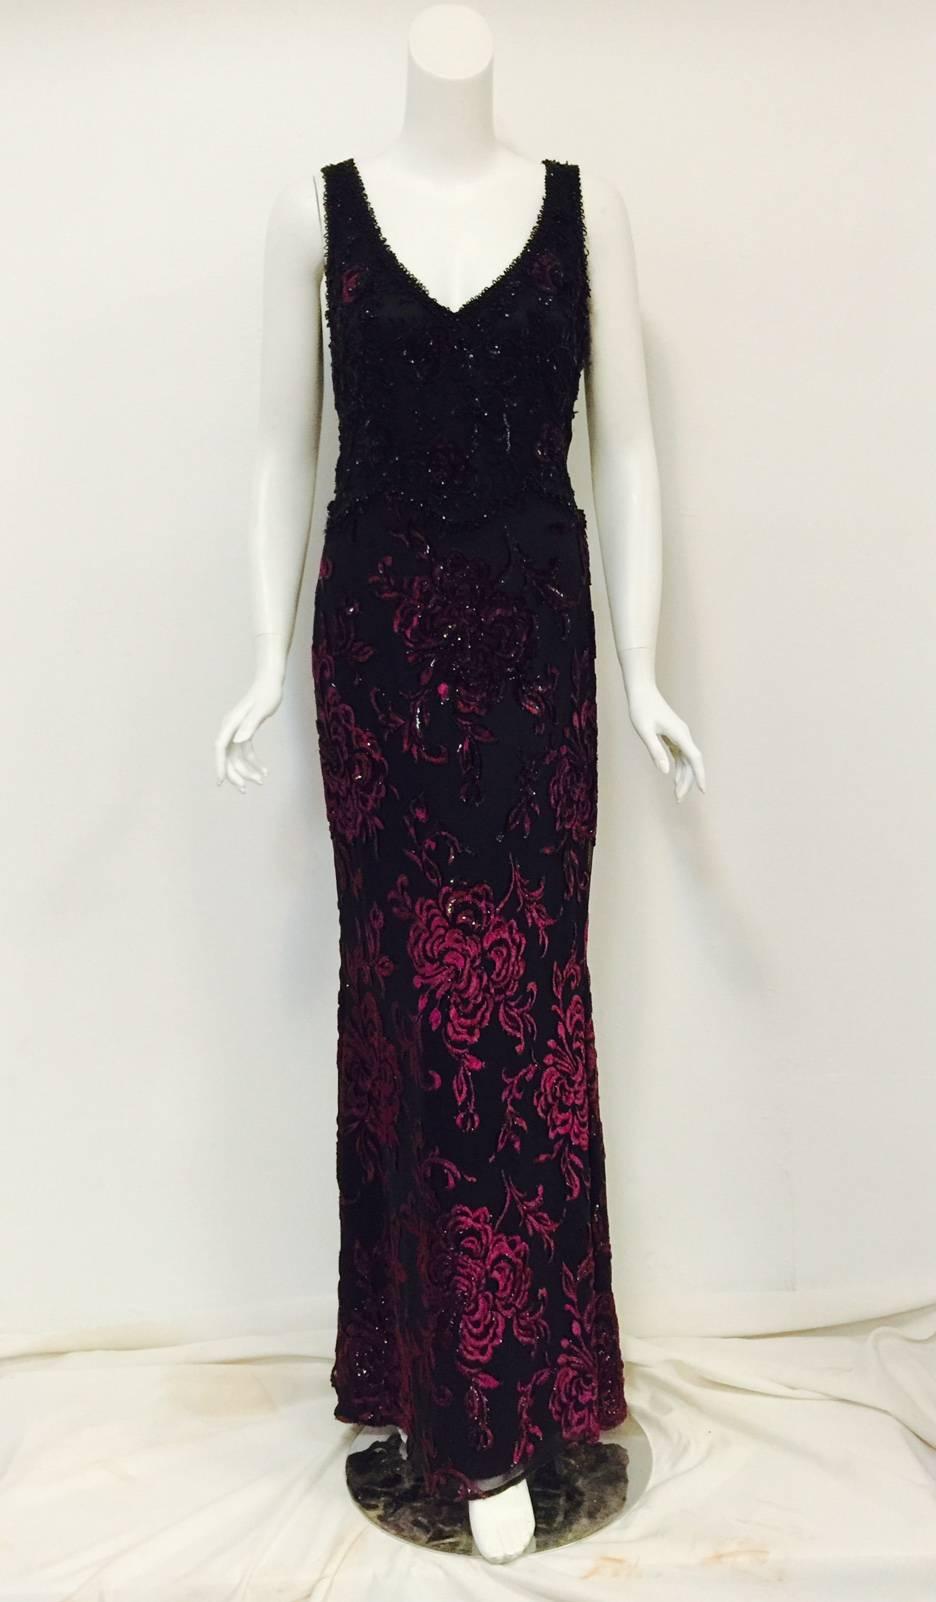 Escada Couture Embroidered Silk Evening Dress is worthy of any Red Carpet and indeed ready for a closeup!   Features a bias-cut sleeveless sheath silhouette cut from luxurious black silk.   Exquisite burgundy velvet floral appliques are enhanced